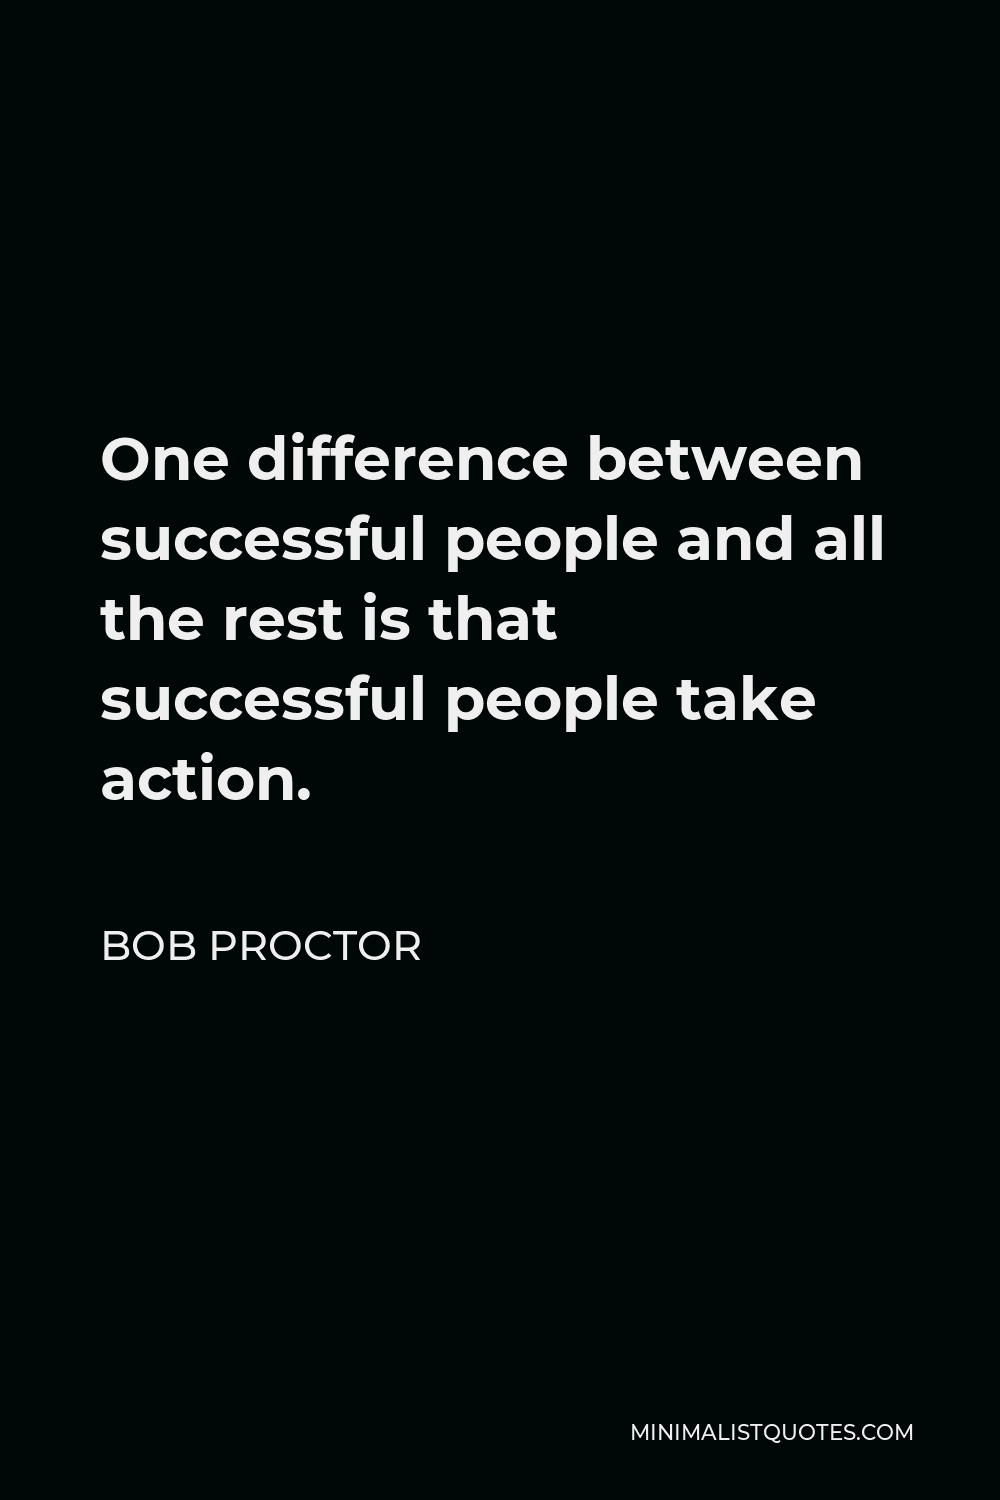 Bob Proctor Quote - One difference between successful people and all the rest is that successful people take action.